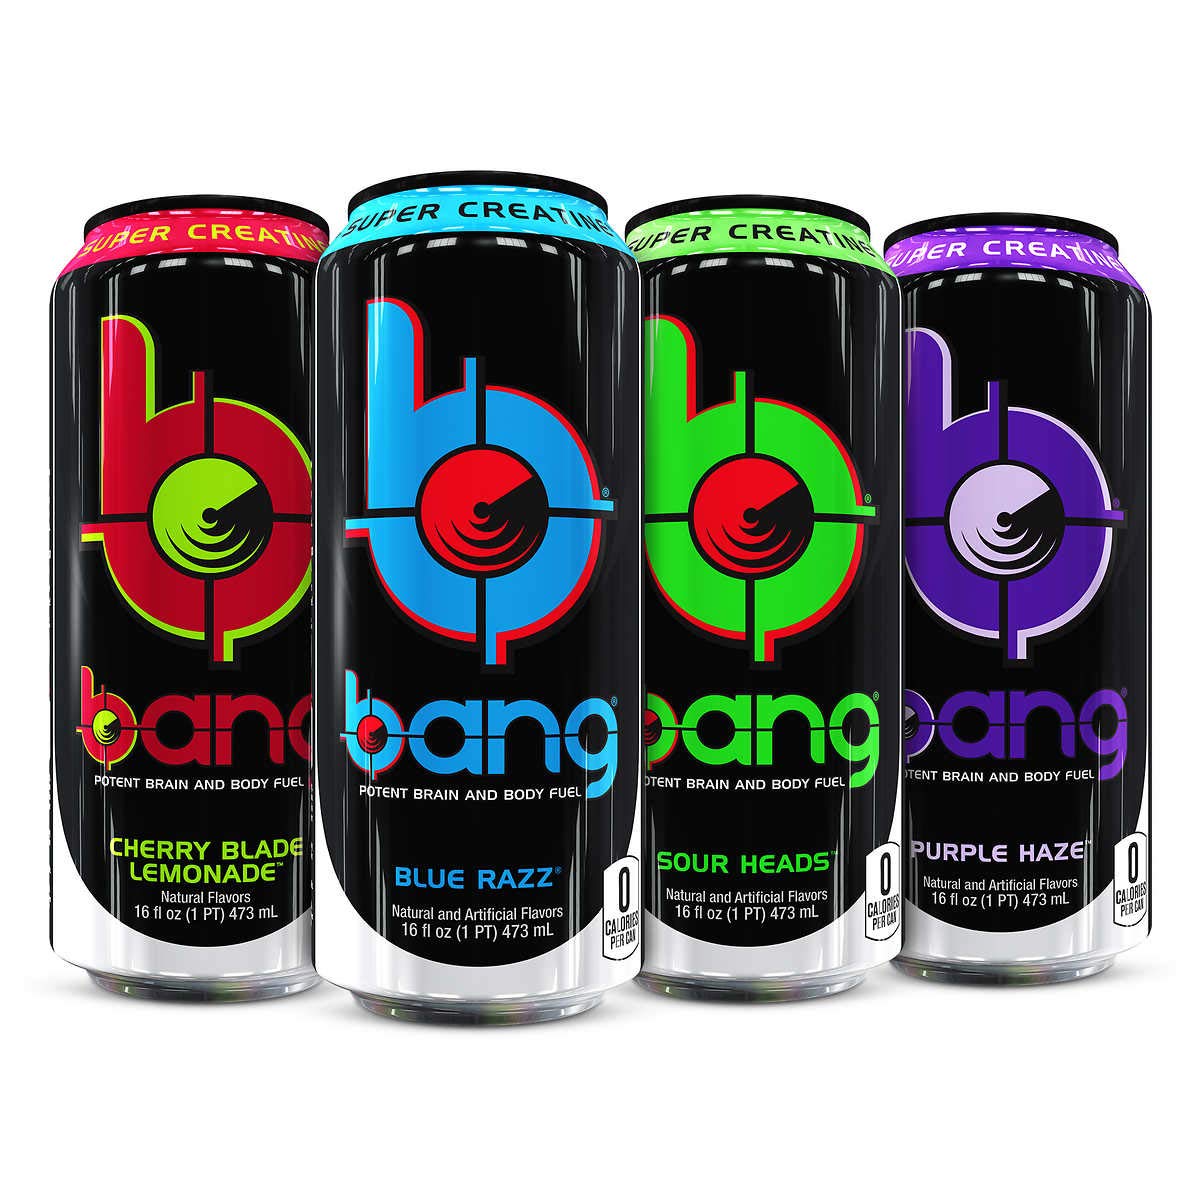 Download Details About Bang Energy Drink Ingredients and More!